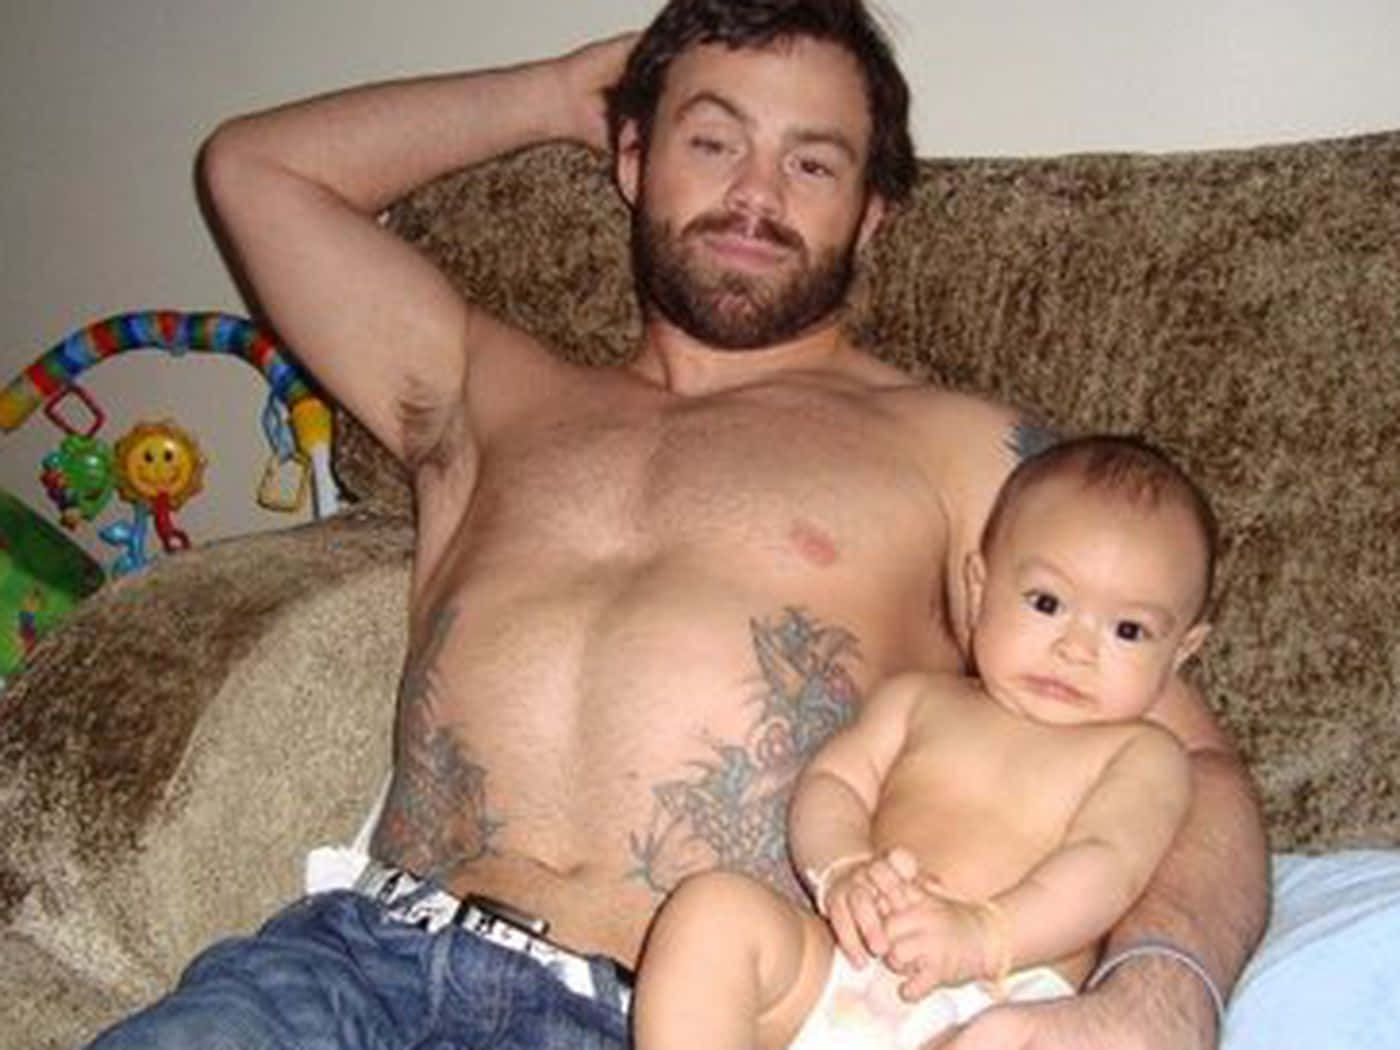 "Legendary MMA Fighter Jens Pulver Spending Quality Time With Baby" Wallpaper